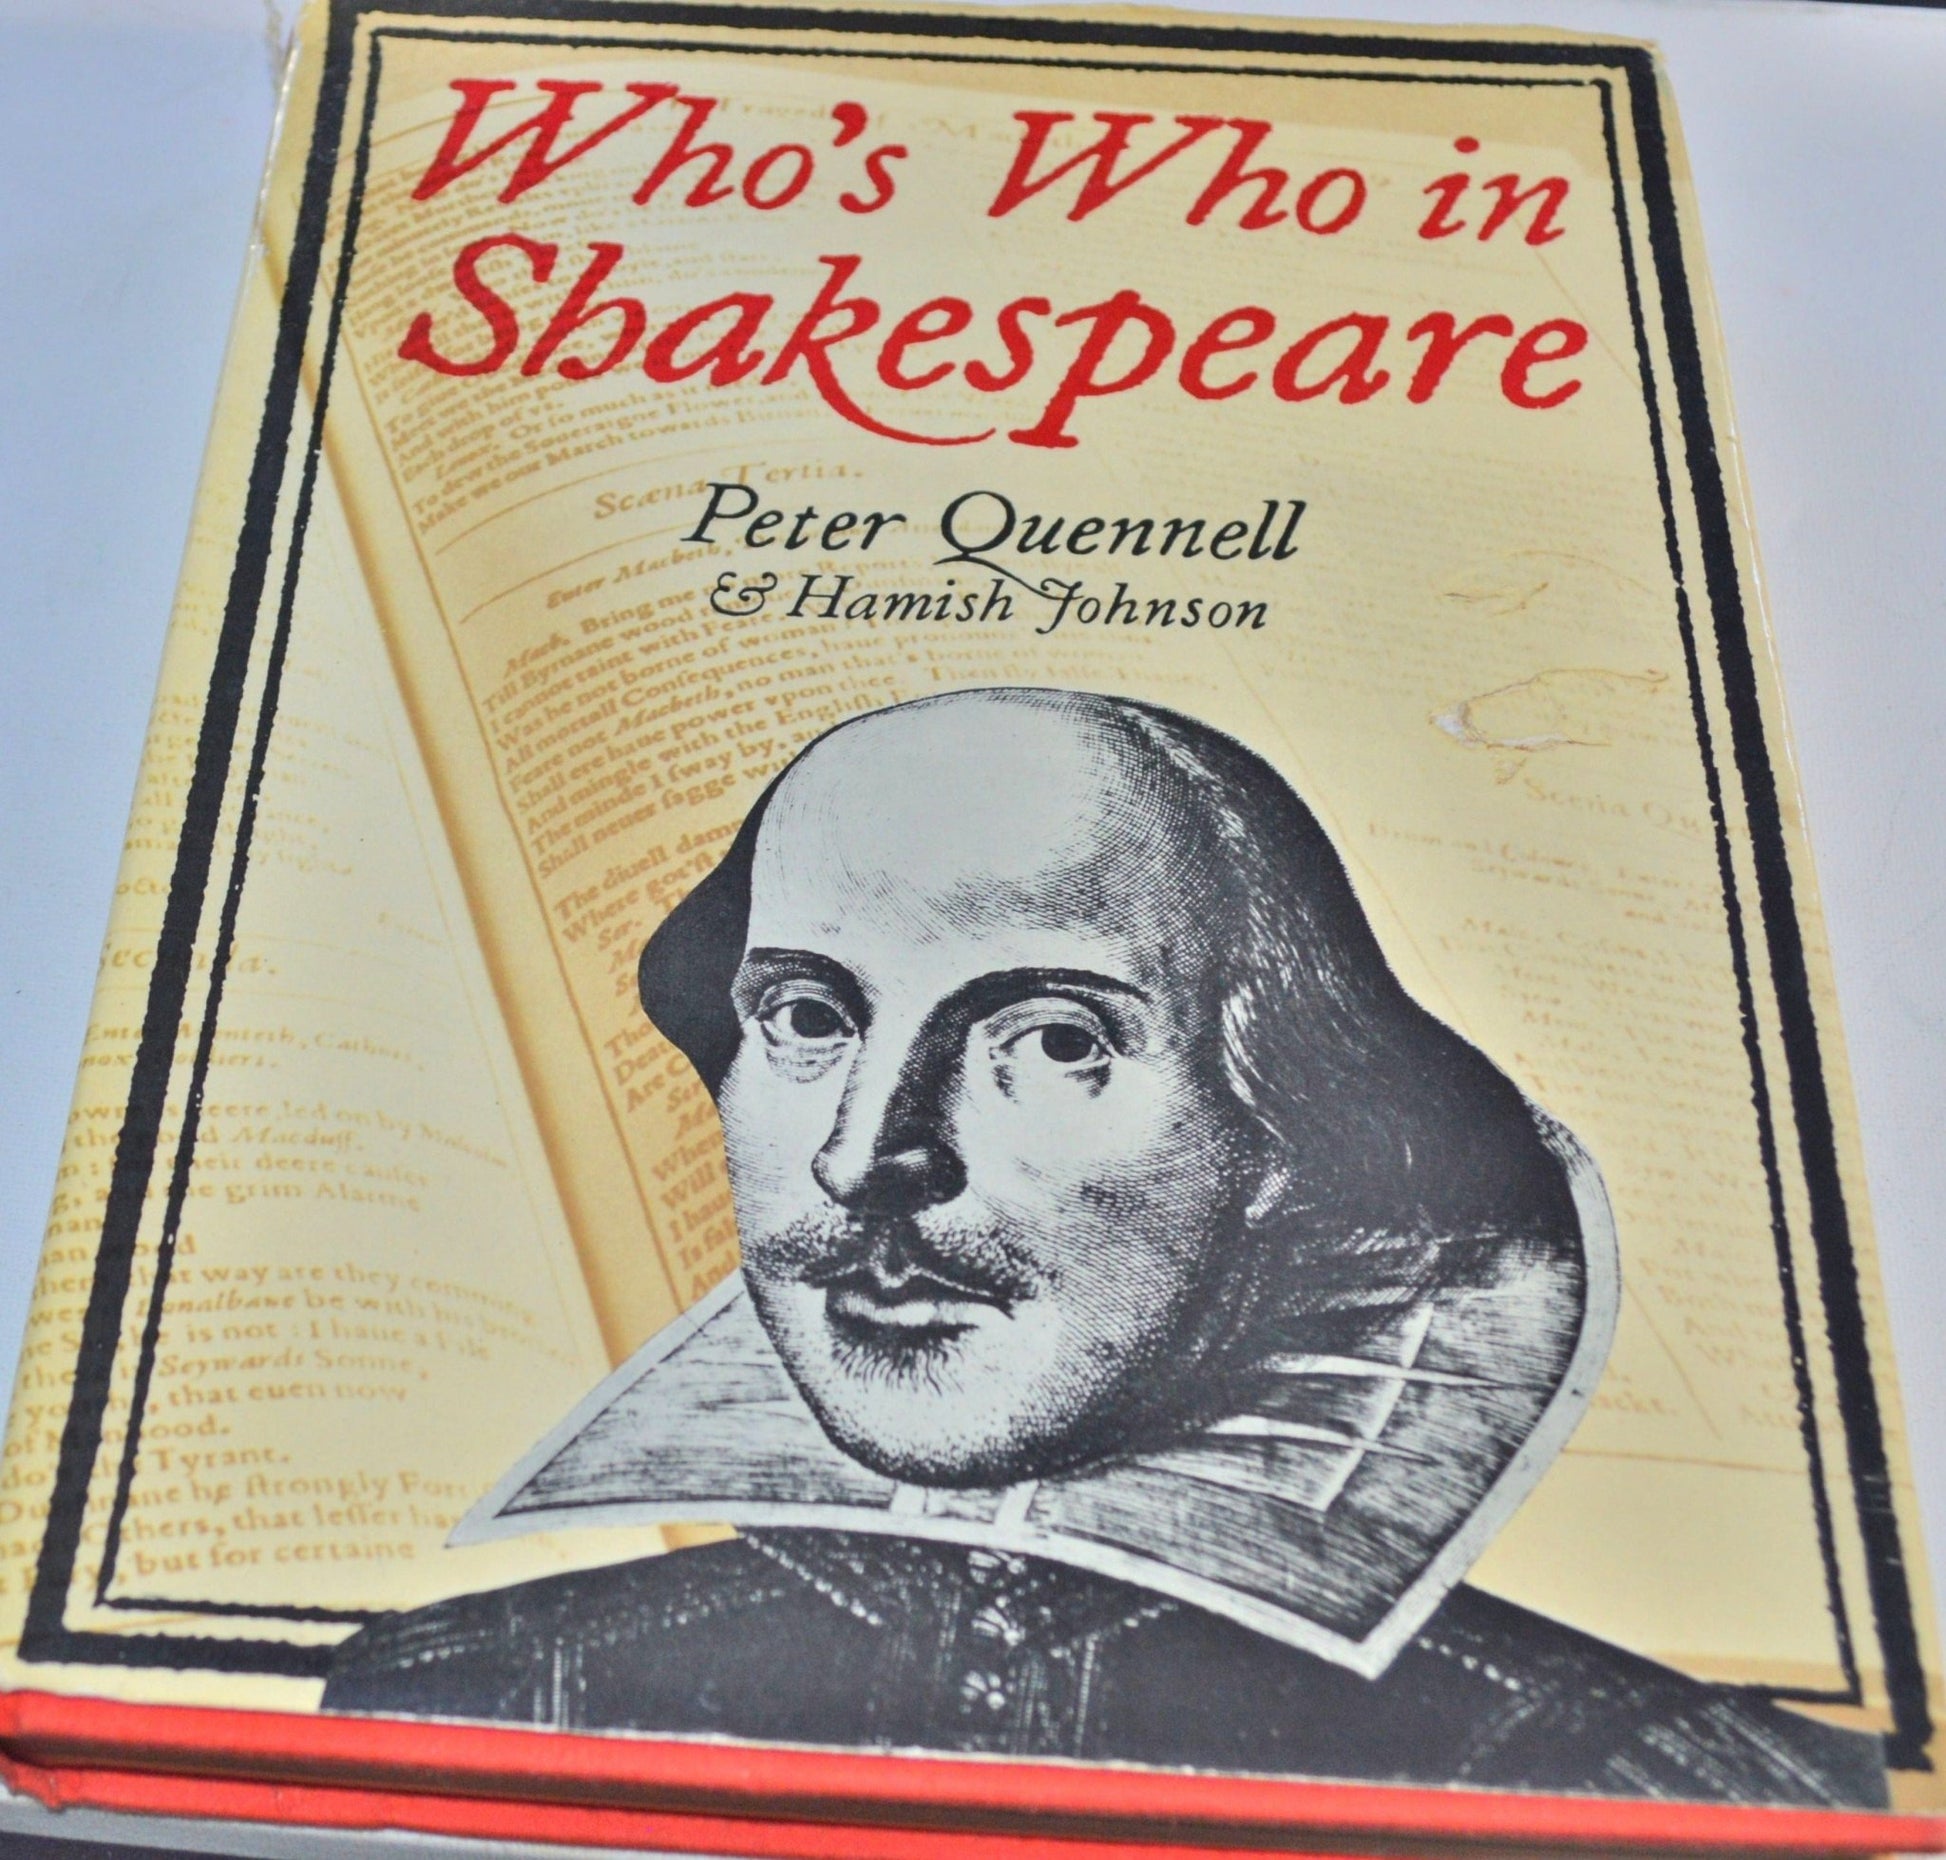 SECONDHAND BOOK WHO’S WHO IN SHAKESPEARE by PETER QUENNELL & HAMISH JOHNSON(PREVIOUSLY OWNED)GOOD CONDITION - TMD167207